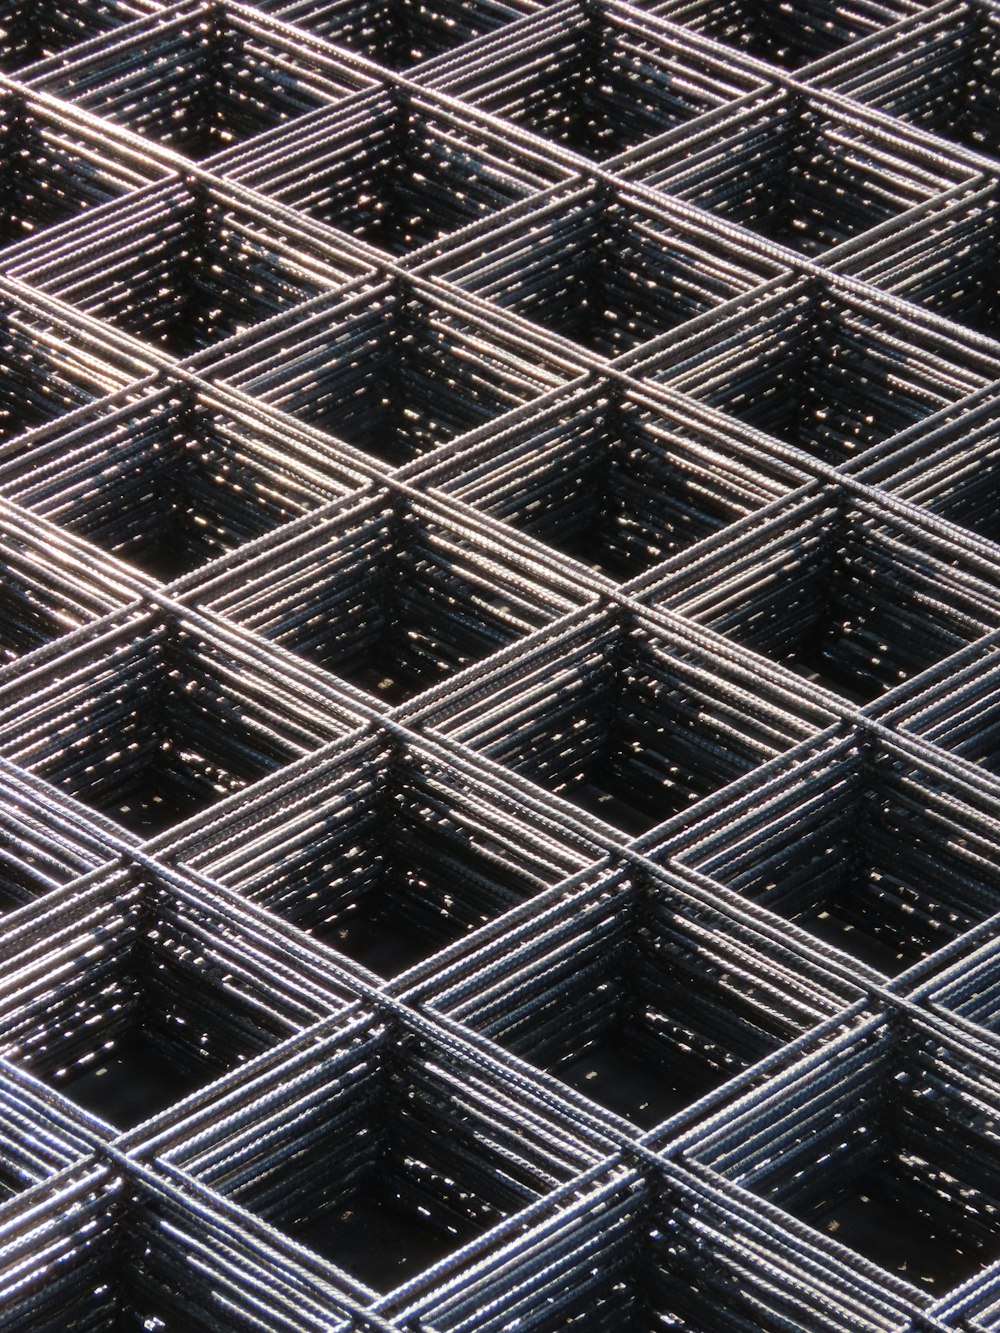 a close up view of a metal grid